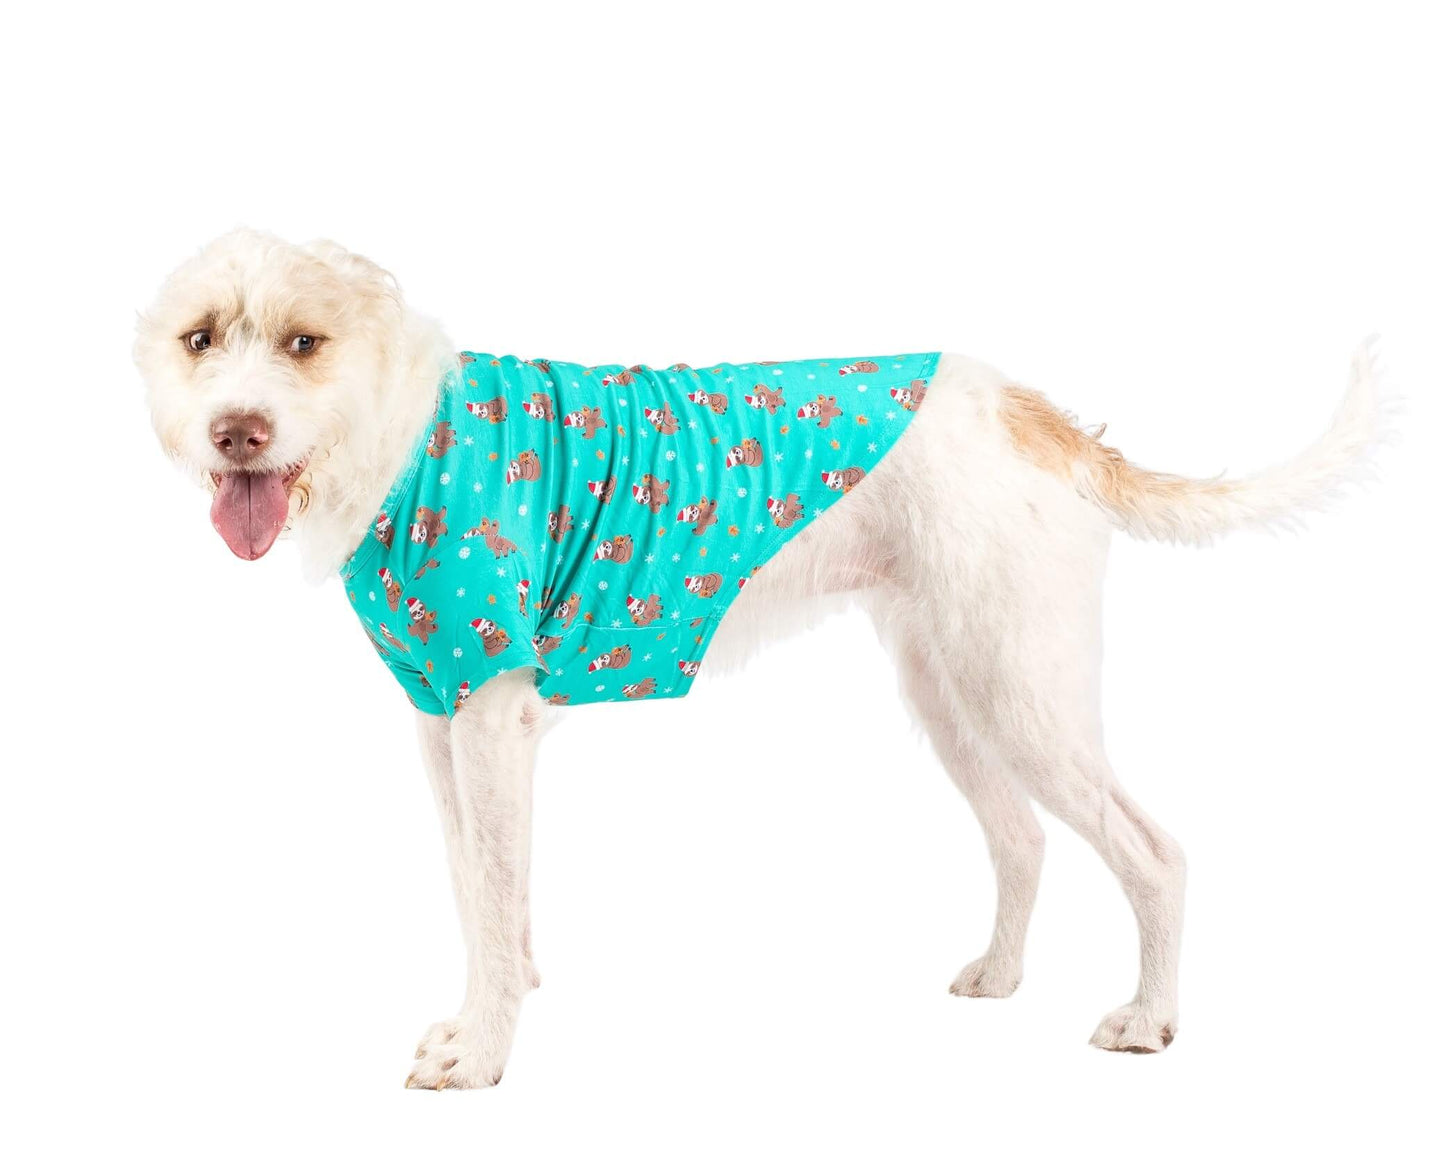 Majestic Large Dog in Festive Sloths Dog Shirt - Impressive Large Breed Dog Wearing a Green Christmas Shirt with Sloths in Santa Hats - Elevate Your Dog's Holiday Style with Size-Inclusive Dog Clothing - Shop Now for Dog Shirts and Dog Clothing for Larger Canine Friends